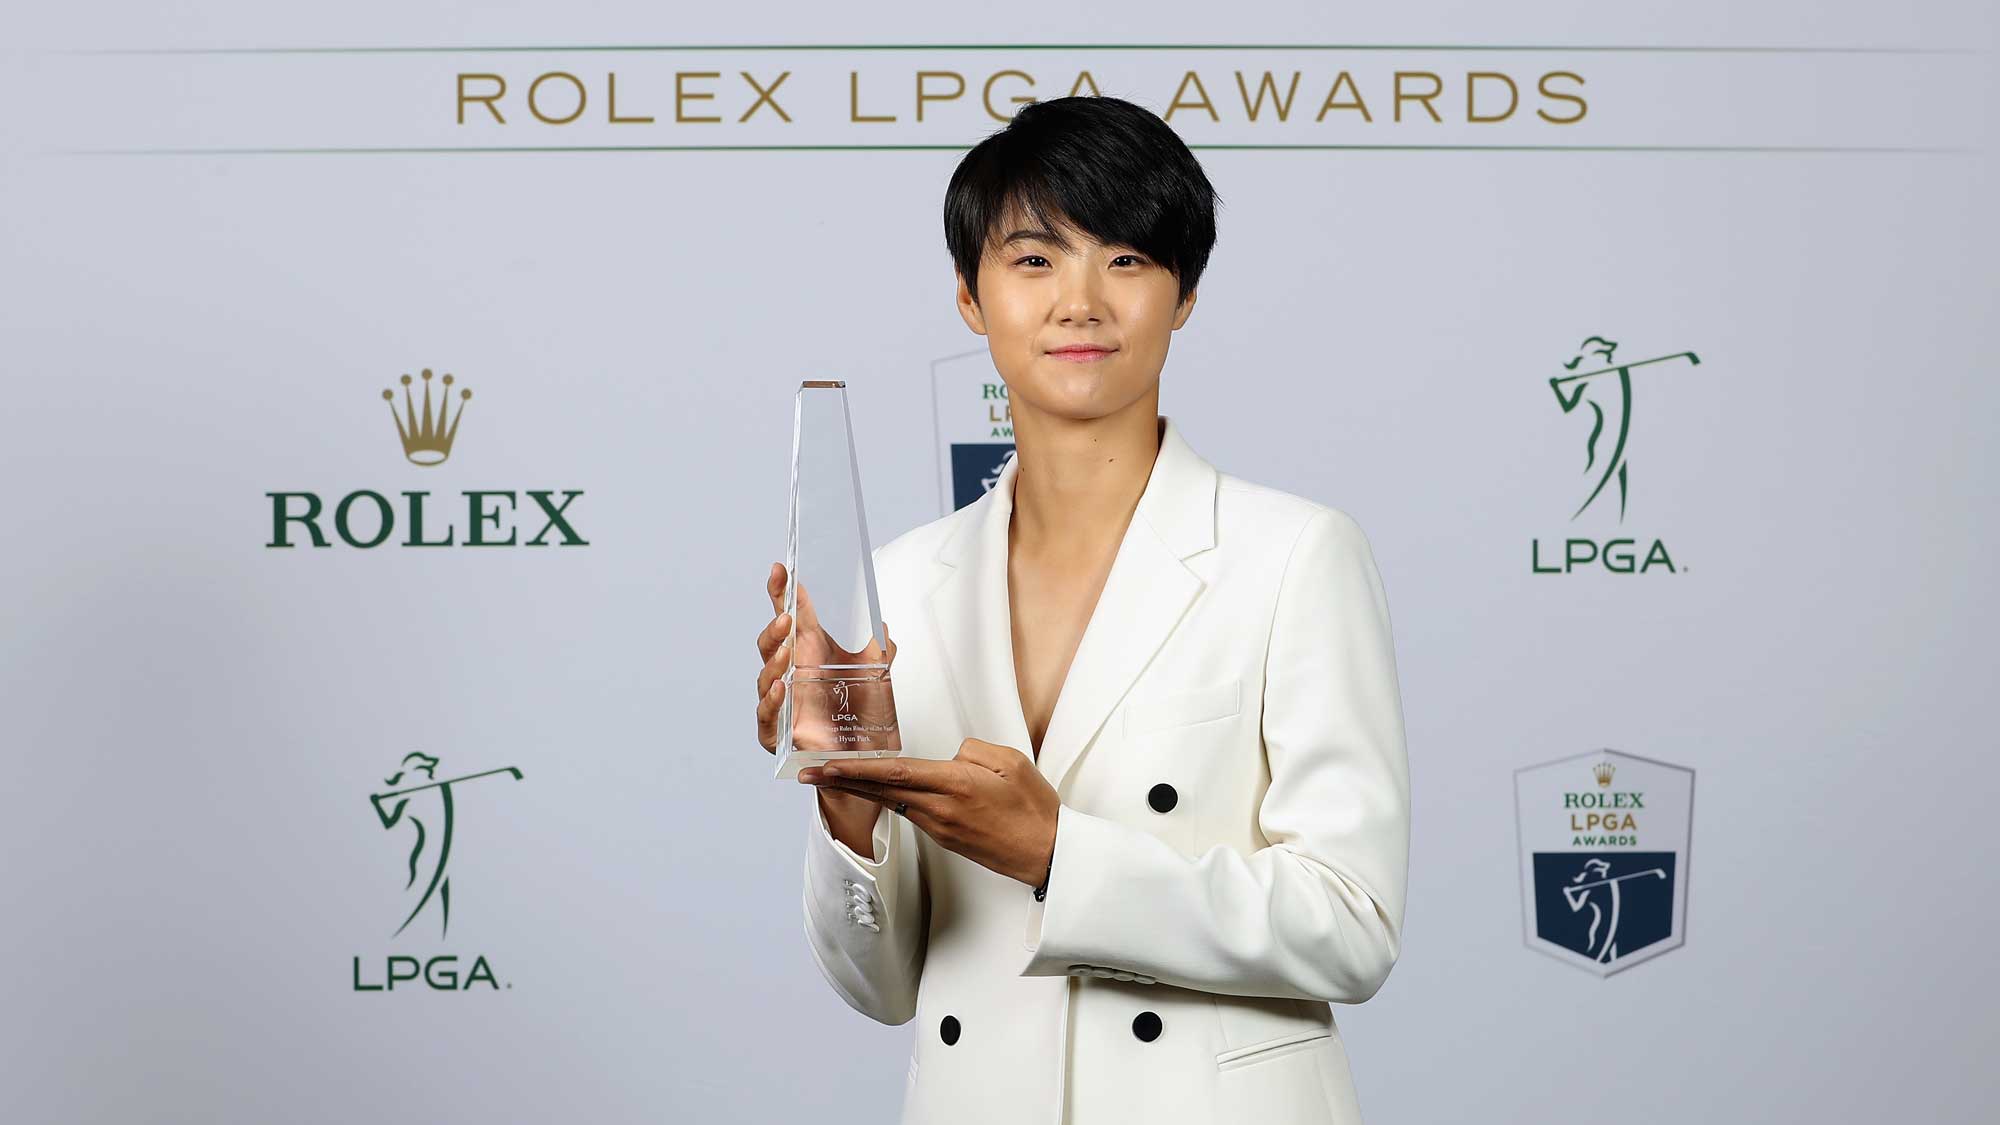 Louise Suggs Rolex Rookie of the Year award recipient Sung Hyun Park of Korea poses for a portrait during the LPGA Rolex Players Awards at The Ritz-Carlton Golf Resort